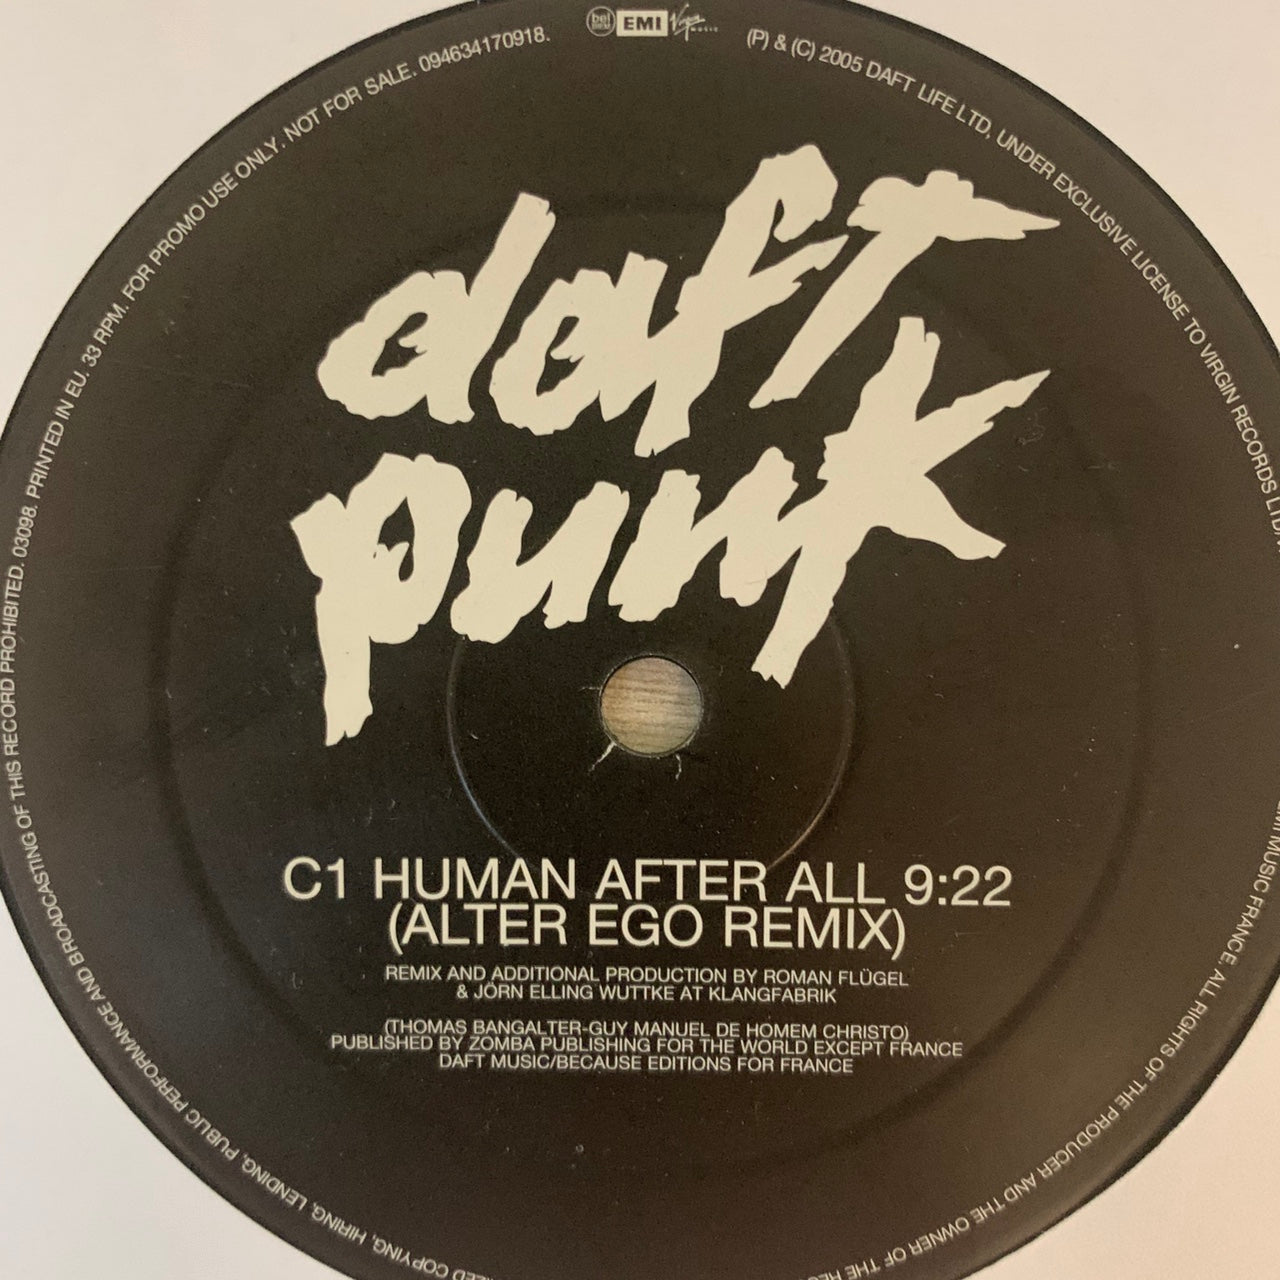 Daft Punk “Human After All” 6 Track 12inch Vinyl Single 2 X Vinyl Double Pack